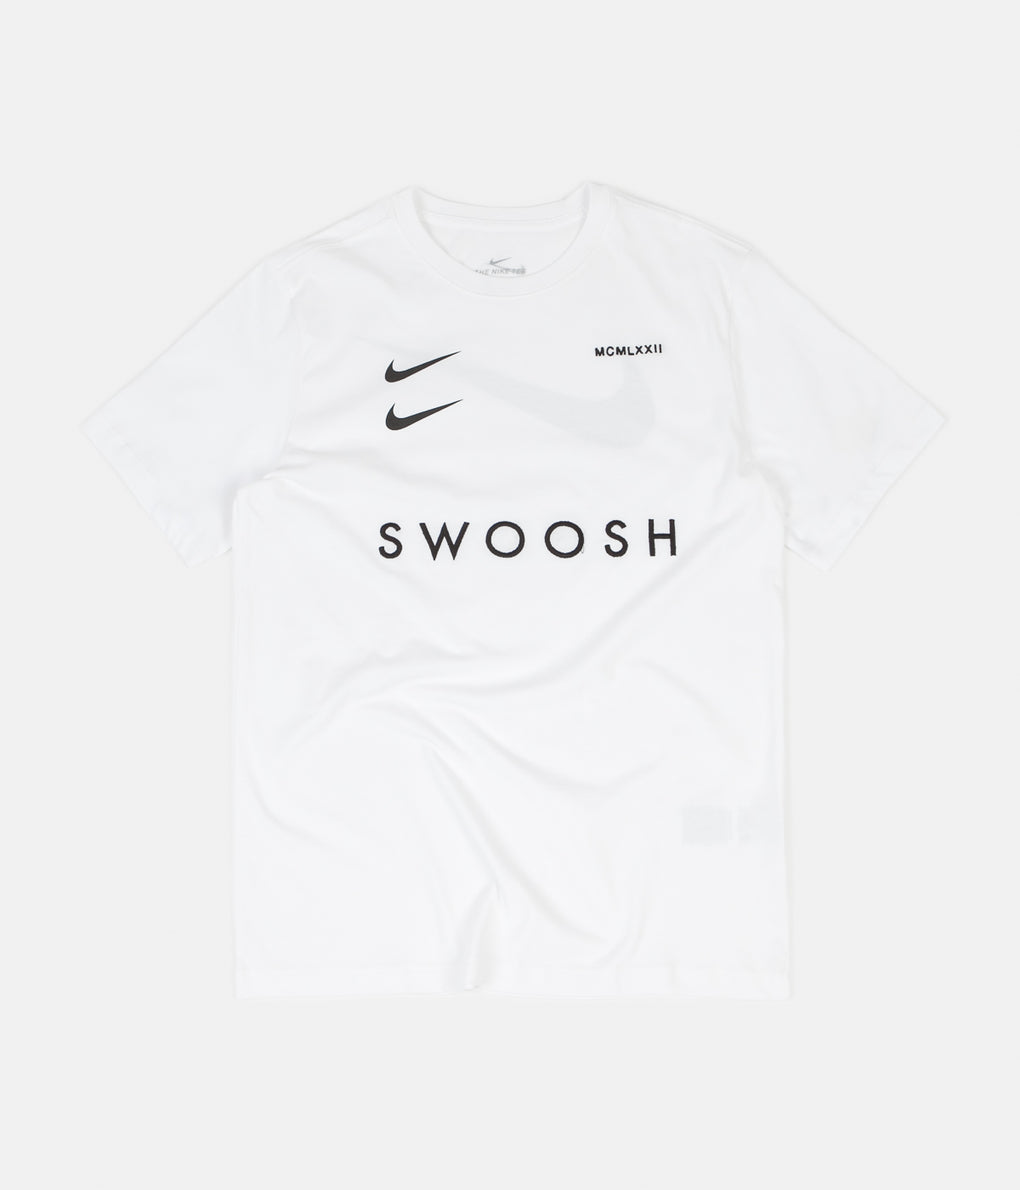 double nike swoosh meaning